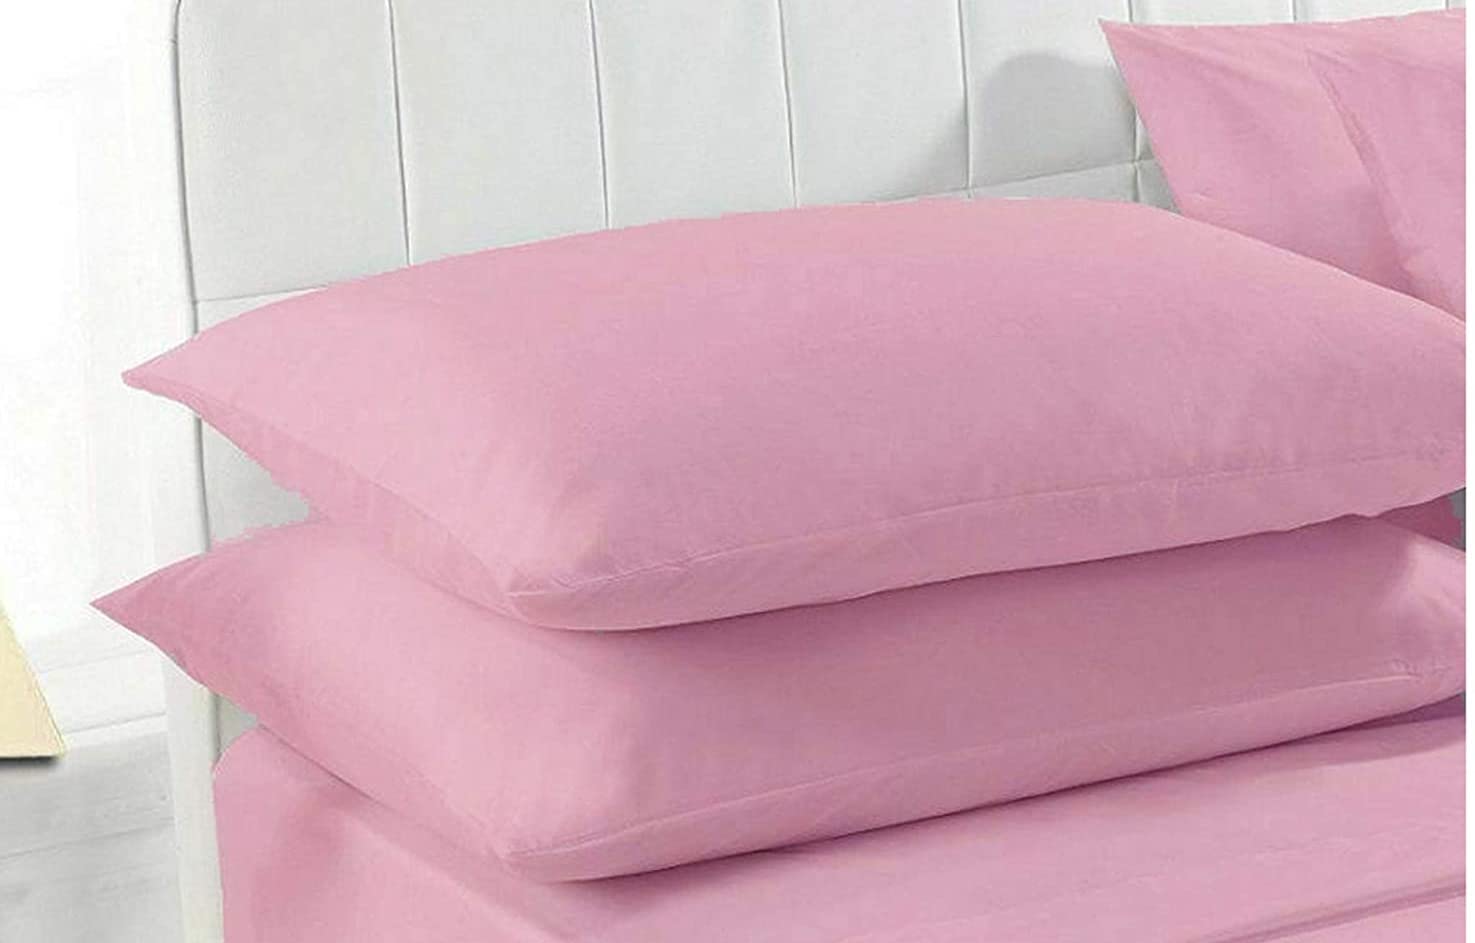 Pair of Housewife Pillowcases Plain Dyed Easy Care Percale Polycotton Bedroom Pillow Covers Soft Quality Blended Cotton (Pink)